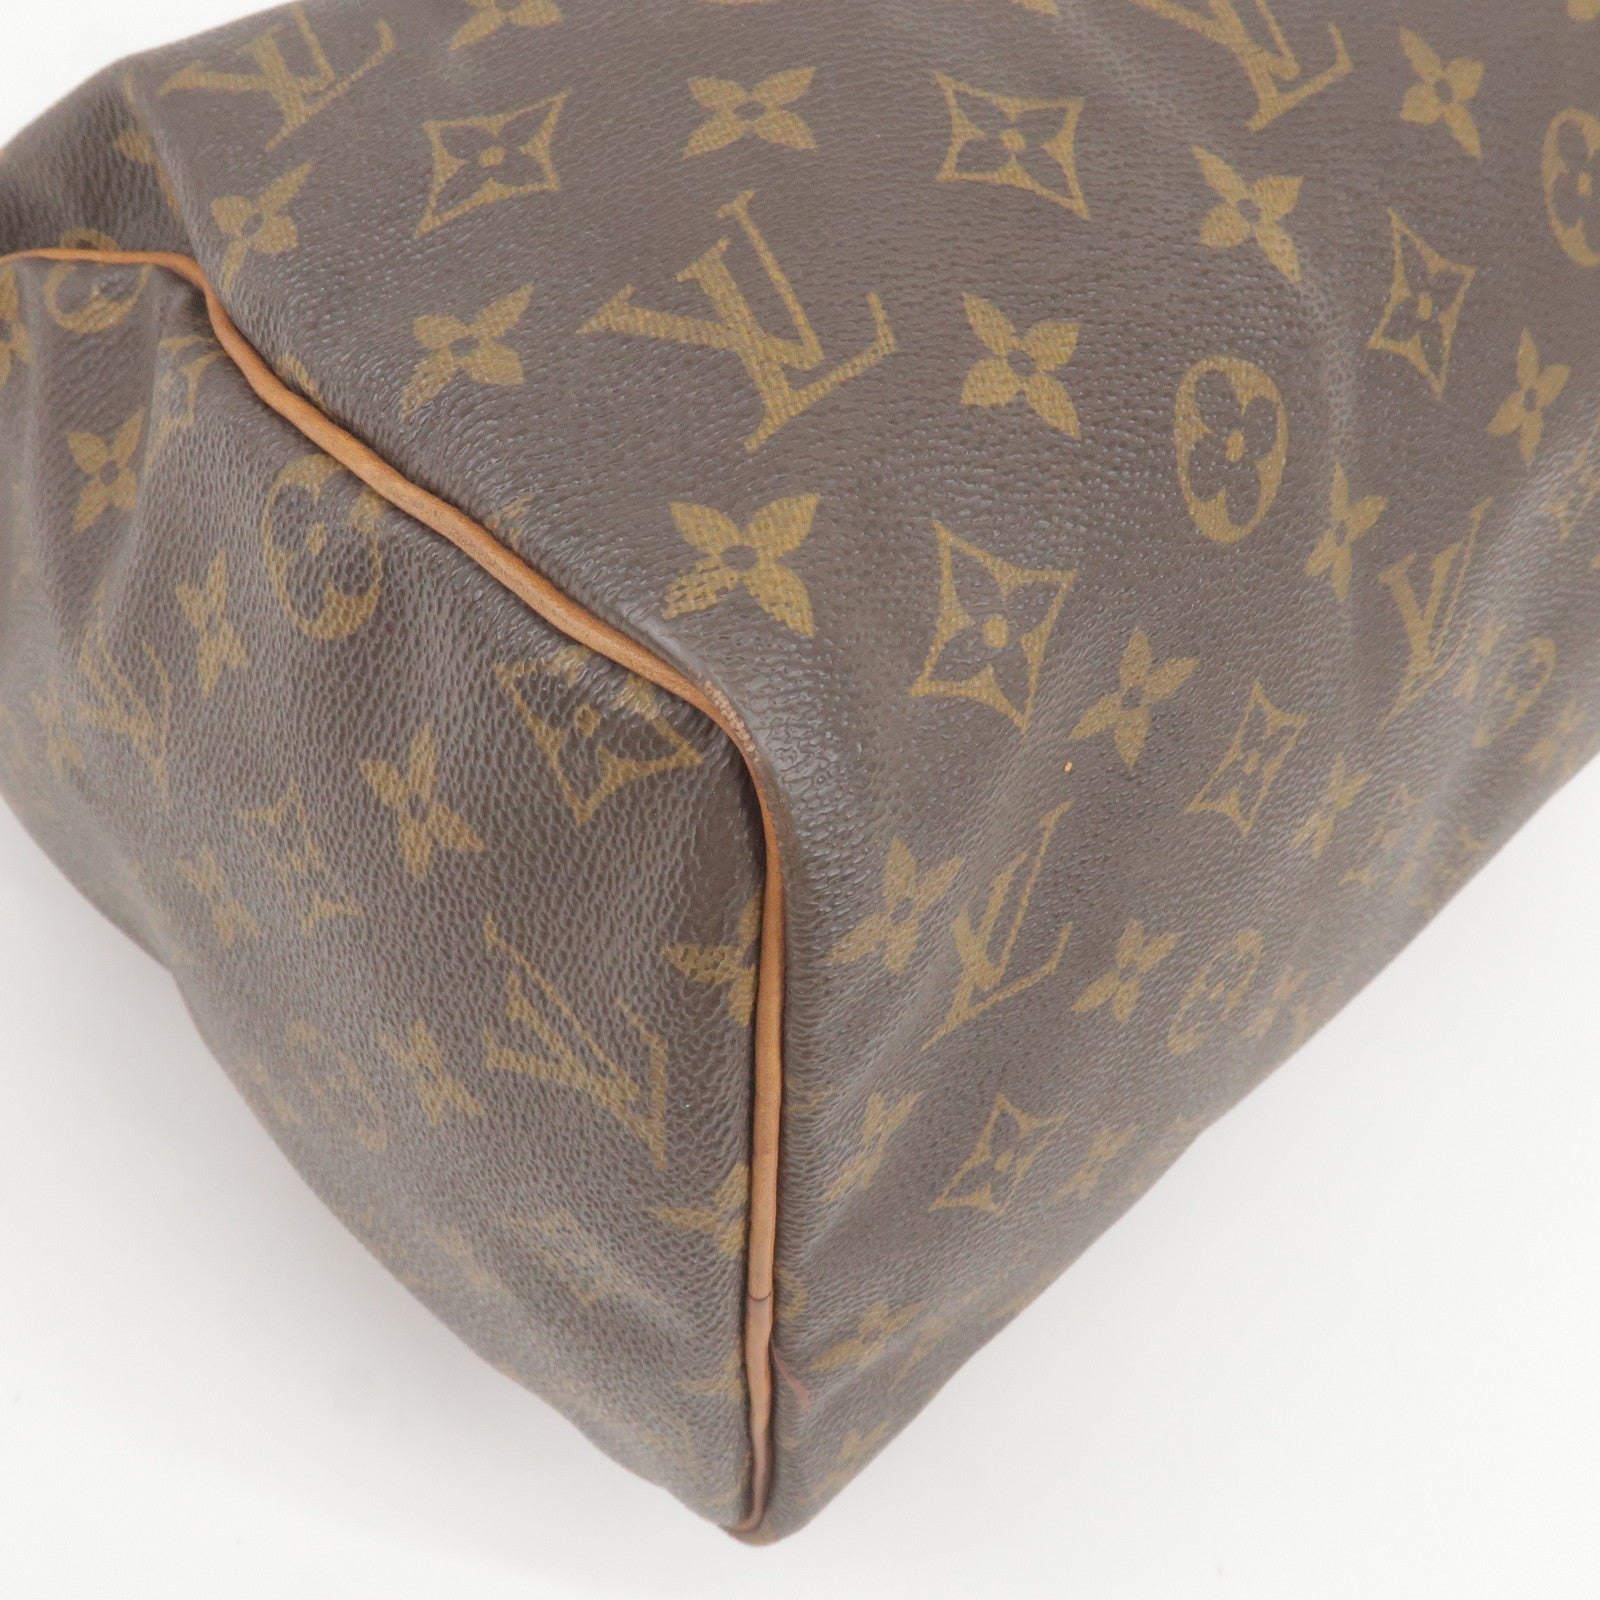 Louis+Vuitton+Armand+Backpack+Black+Leather for sale online